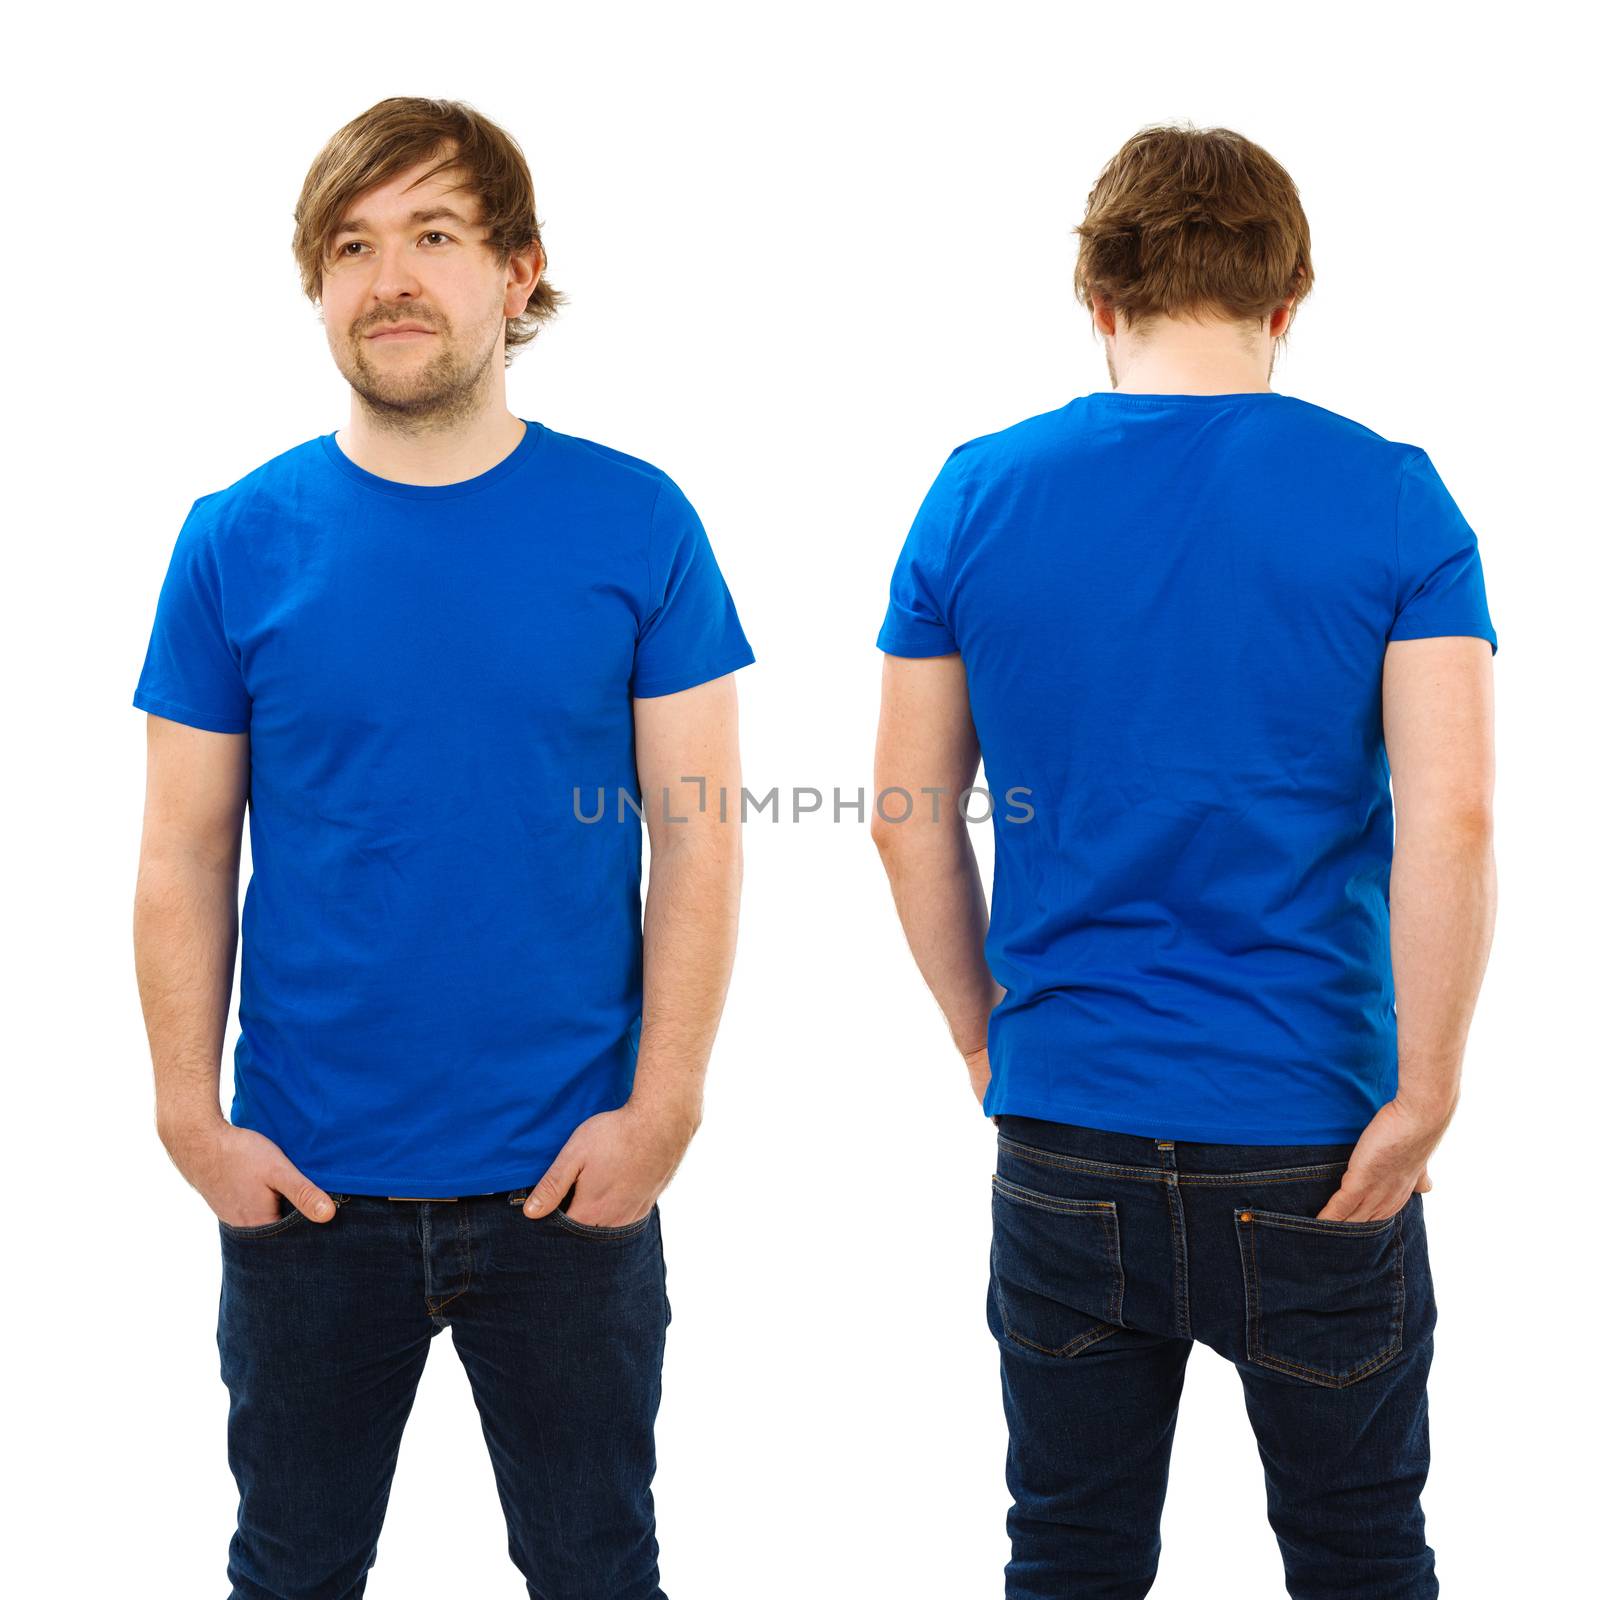 Photo of a man wearing blank blue t-shirt, front and back. Ready for your design or artwork.